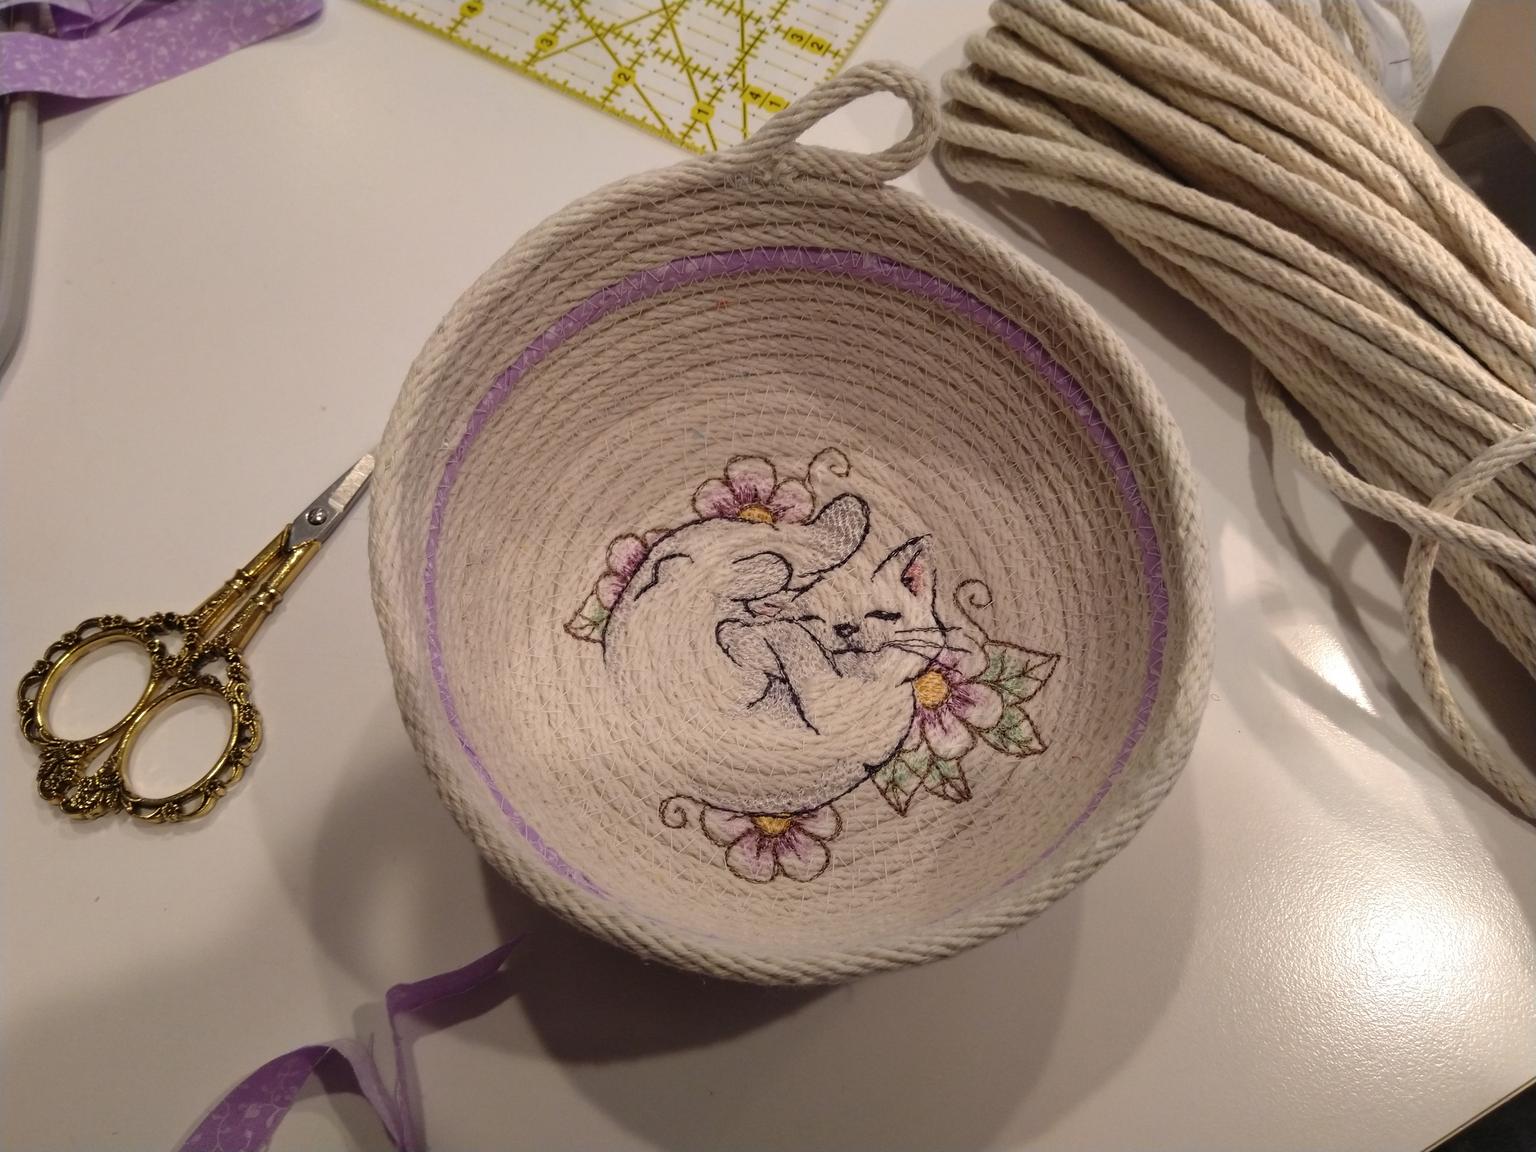 Today in &#8220;weird things to embroider on&#8221;: clothesline